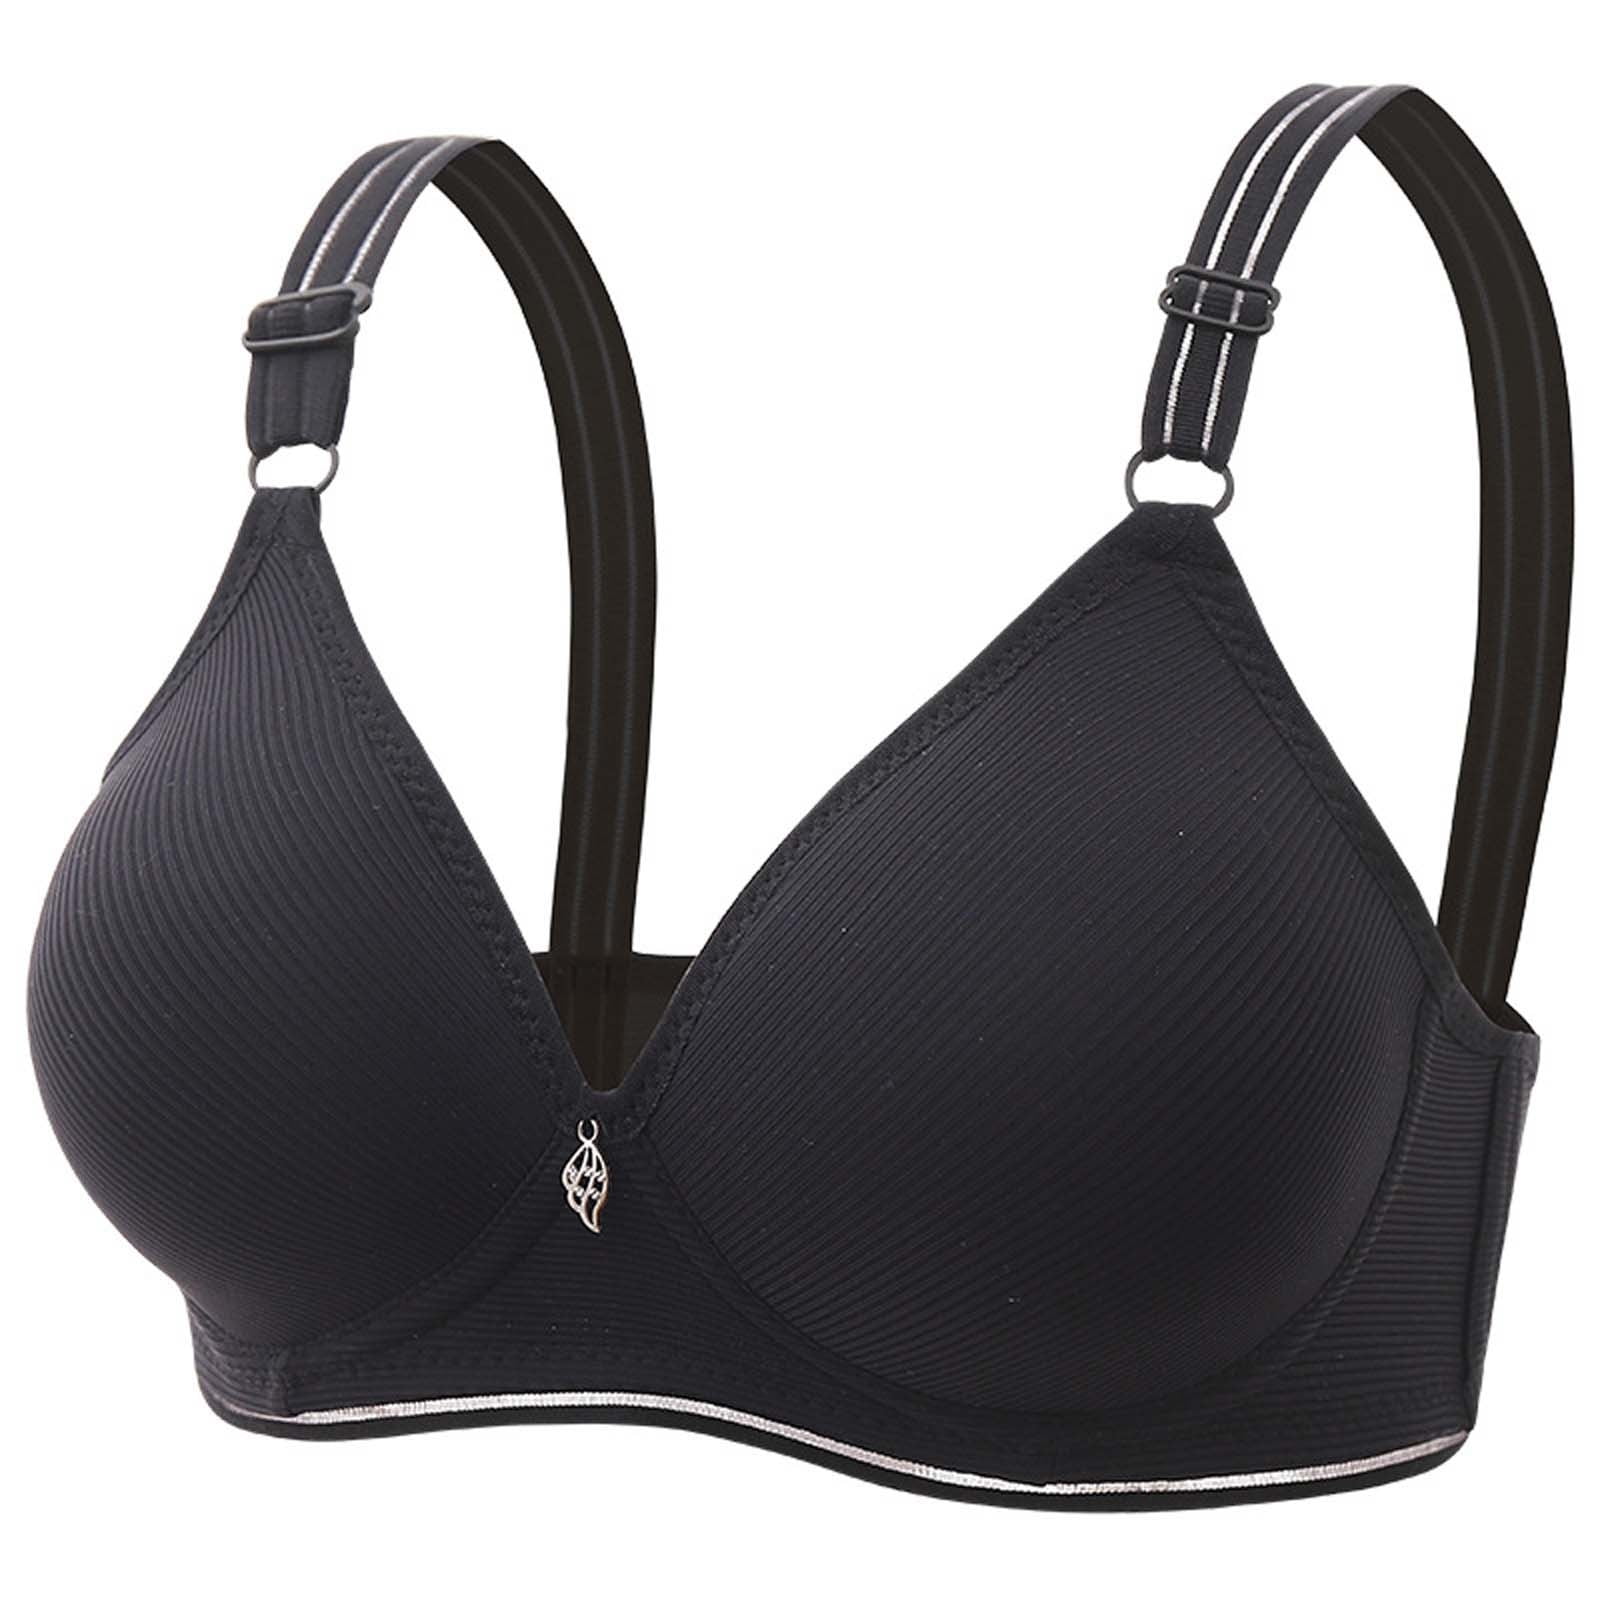 TIANEK Comfortable Breathable No Rims 38ddd Bras for Women Clearance